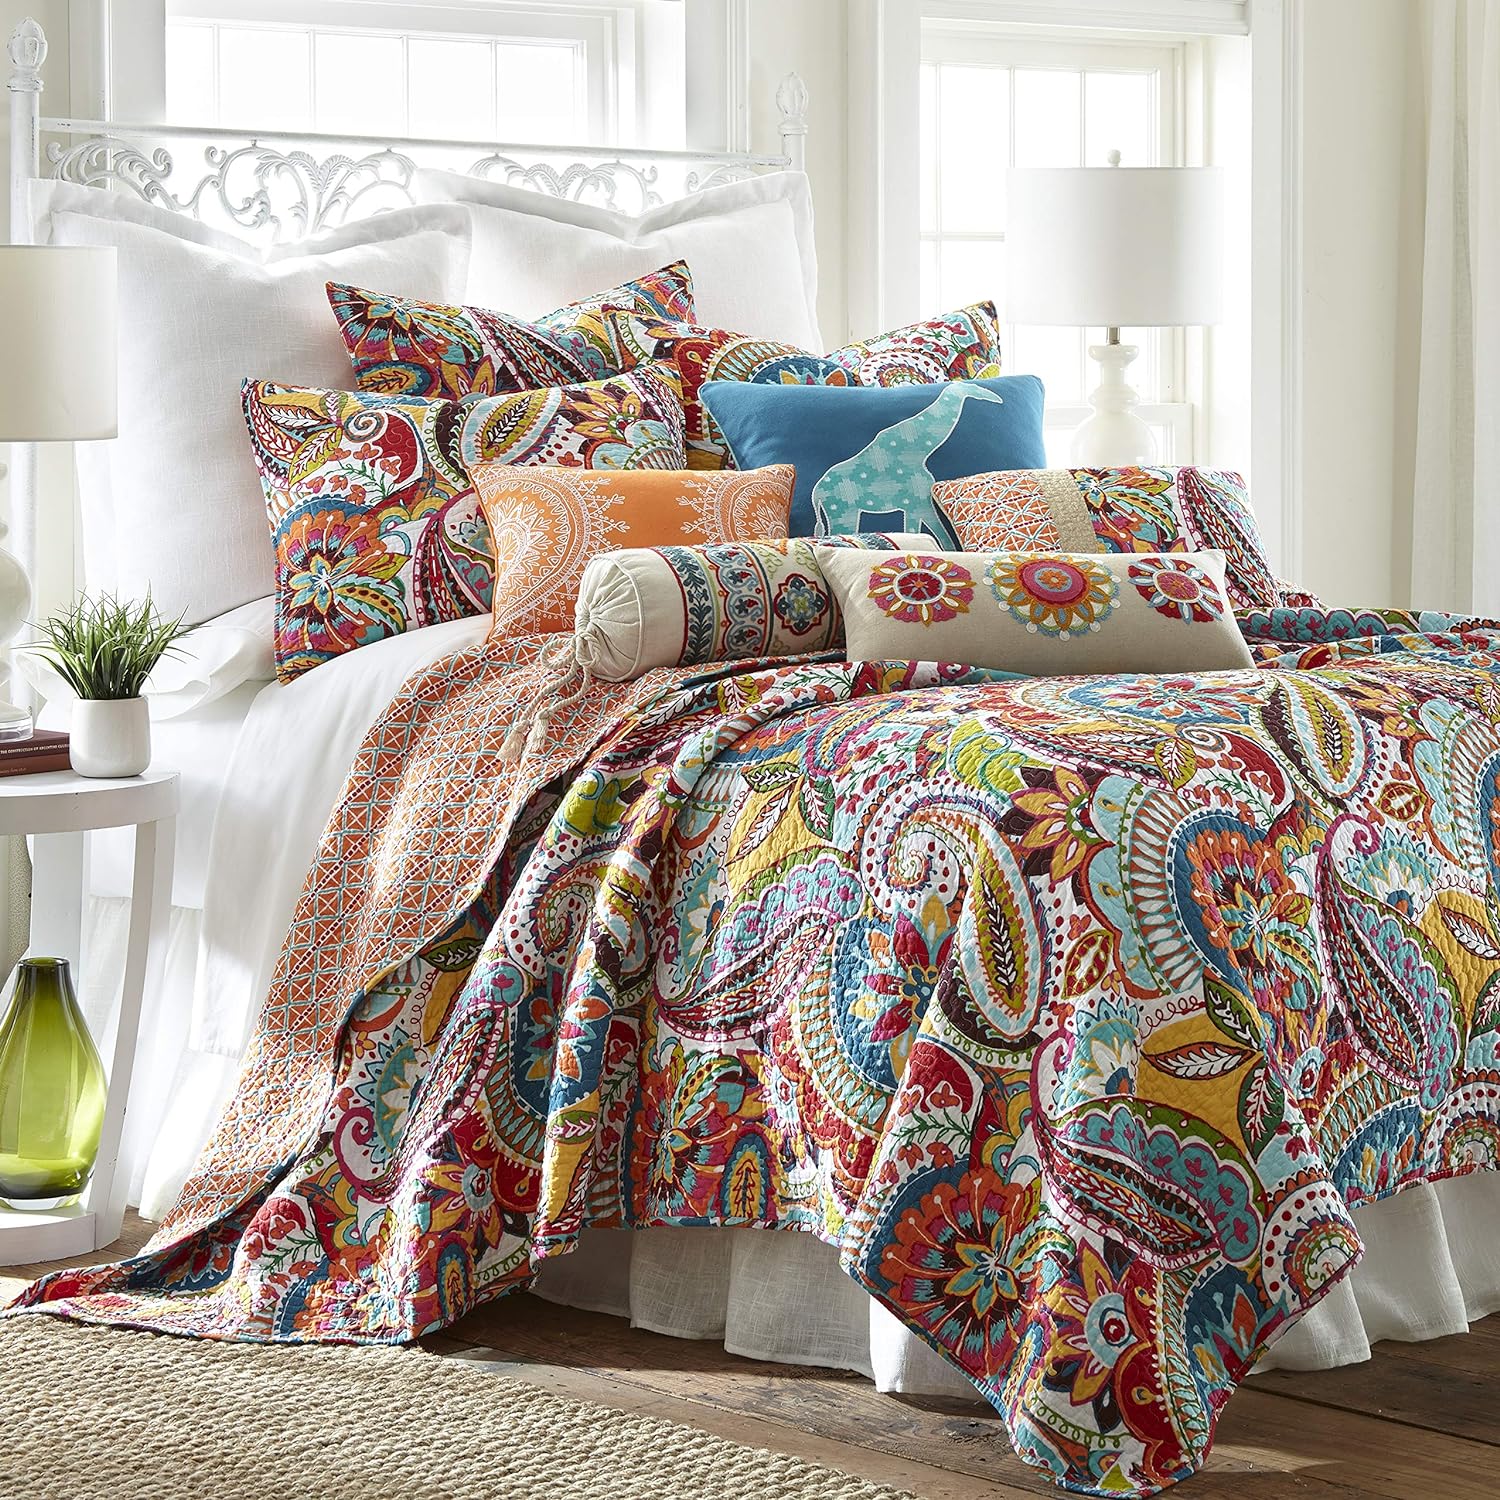 TKM Home Home Rhapsody Quilt Set - King Quilt + Two King Pillow Shams - Paisley In Yellow Orange Red Green Blues - Quilt Size?